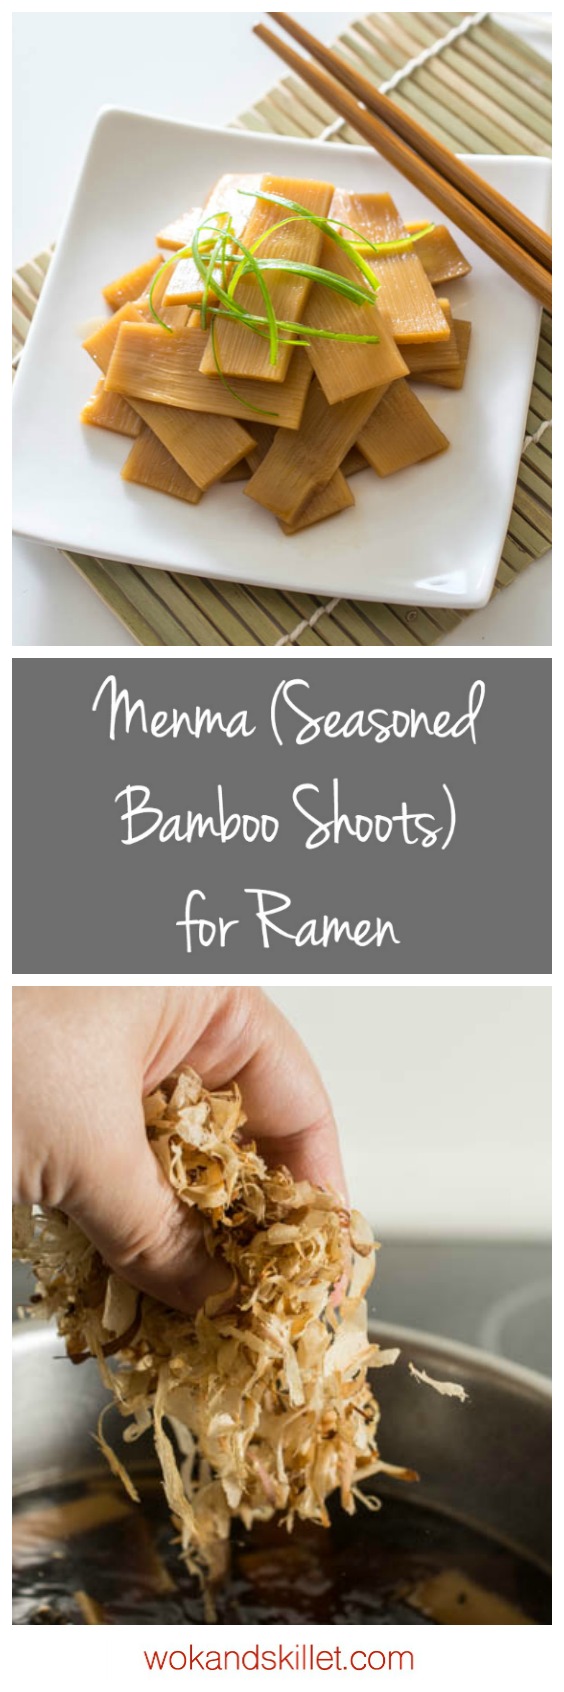 Menma (Seasoned Bamboo Shoots) is a classic Japanese ramen topping but can also be enjoyed as a snack. Slightly crunchy and extremely flavorful. 